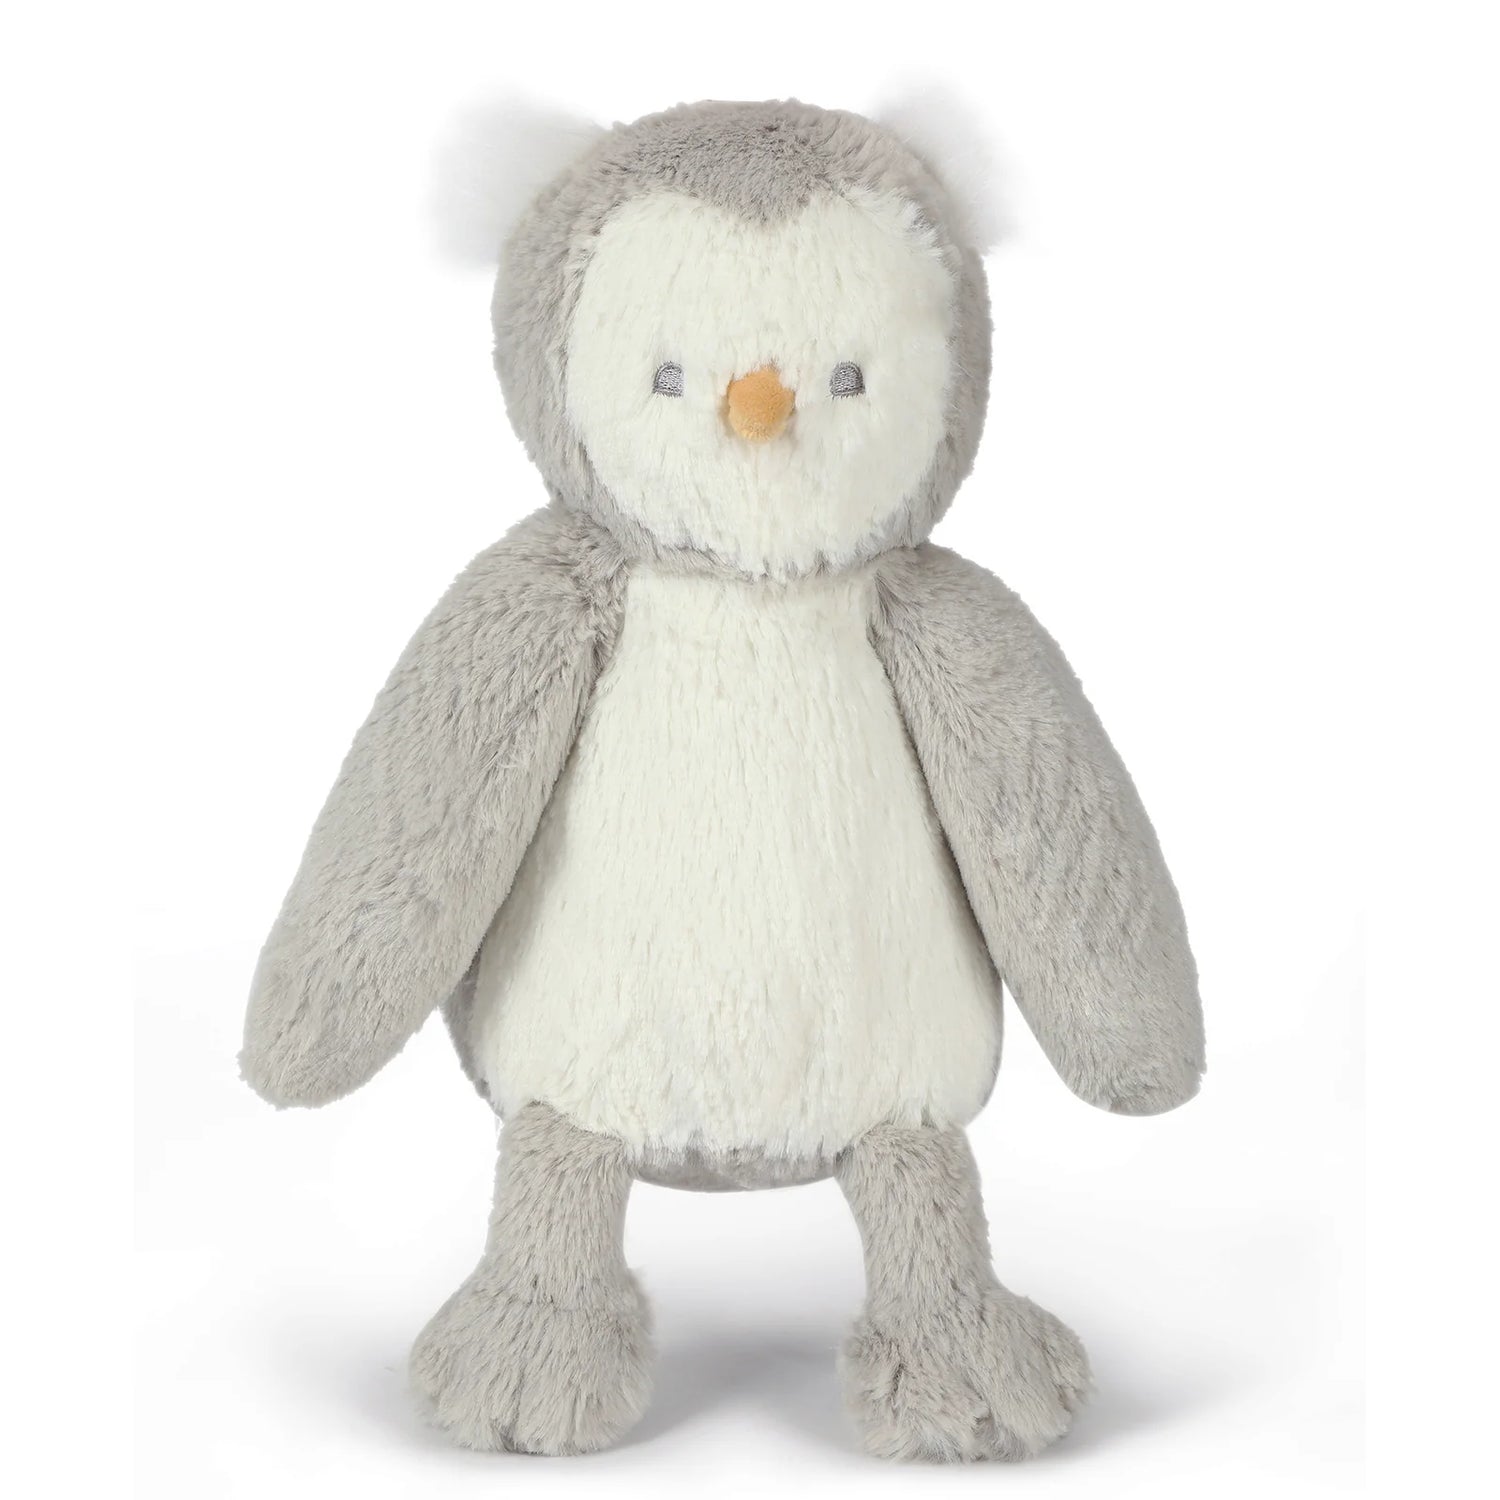 O.B. DESIGNS EVIE OWL SOFT TOY - THE LITTLE EAGLE BOUTIQUE